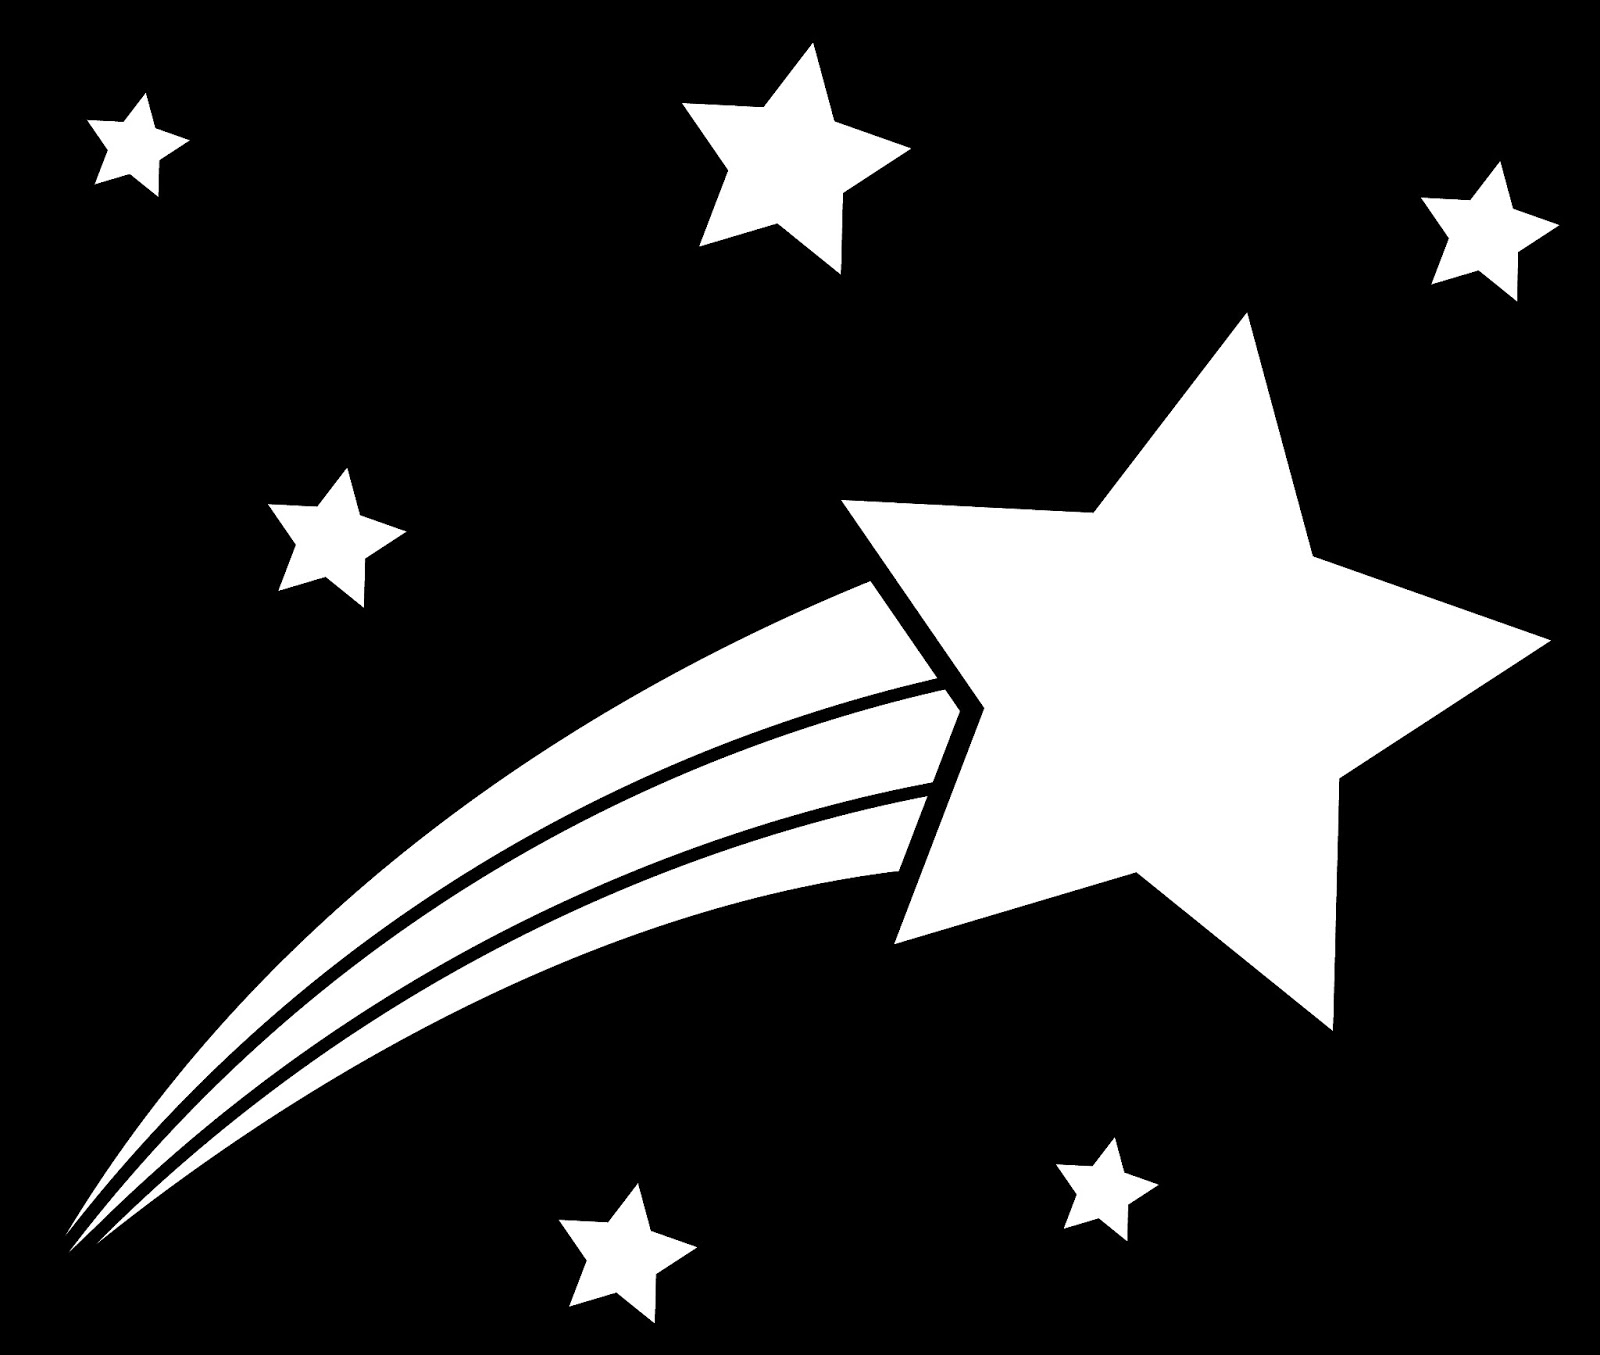 Shooting Star Clip Art Black And White Clipart Panda Free Clipart